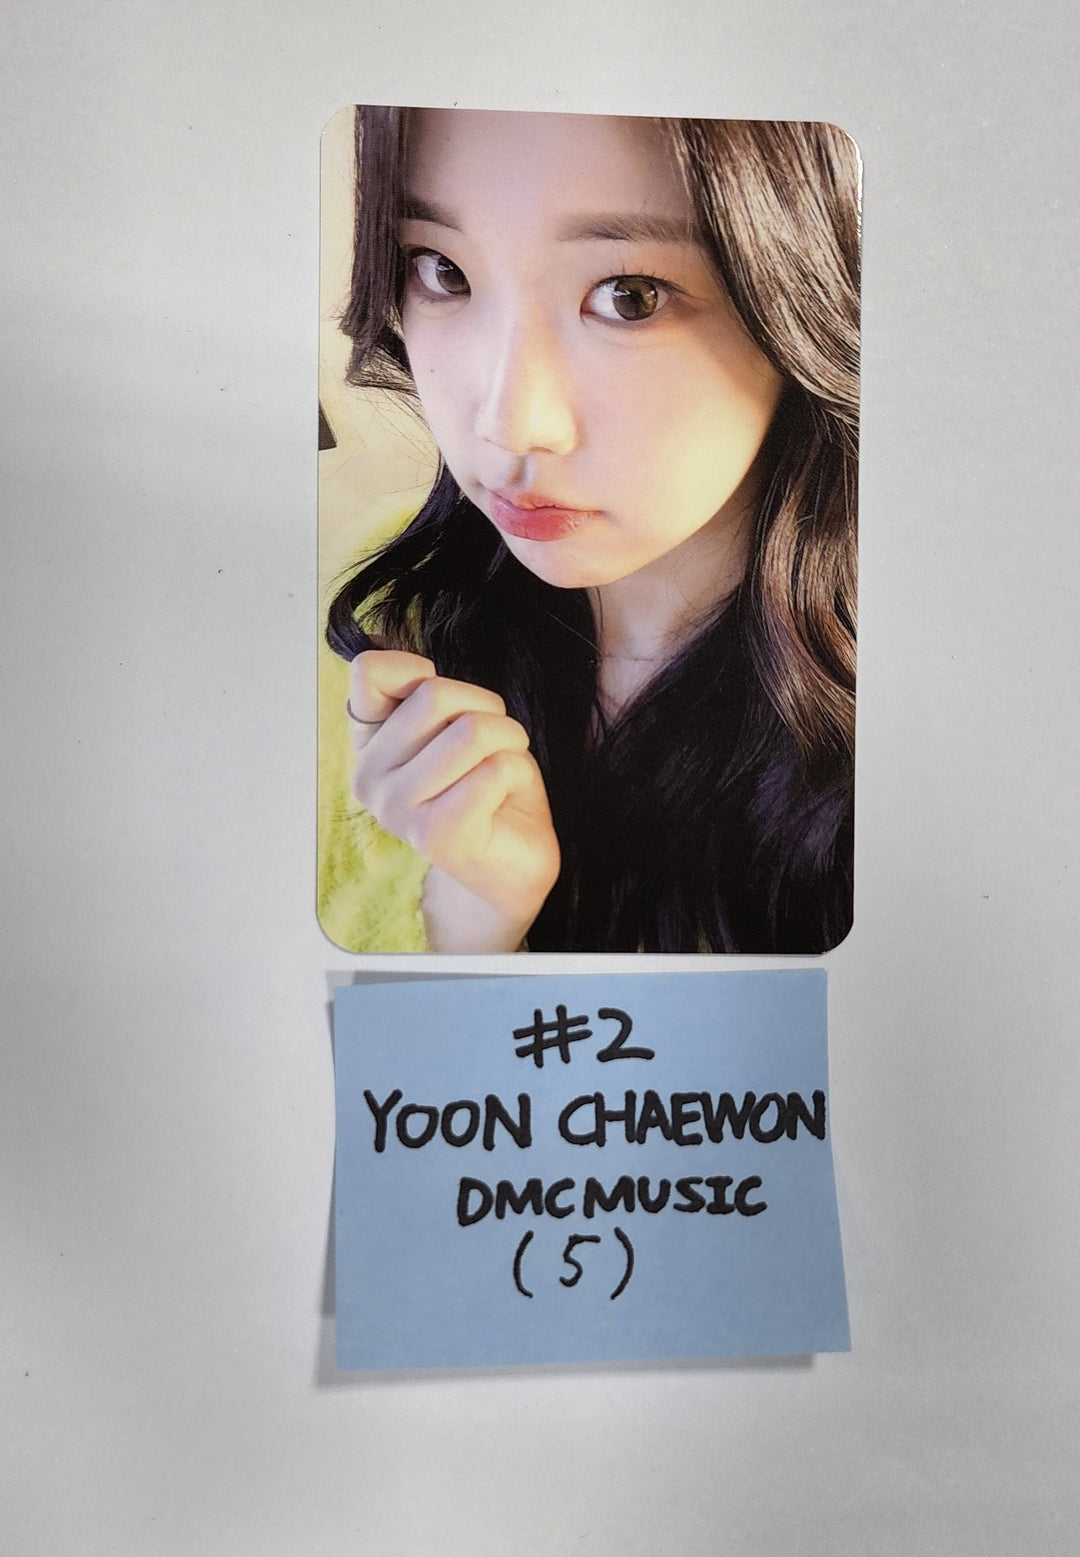 CLASS:y "CLASS IS OVER" - DMC Fansign Event Photocard